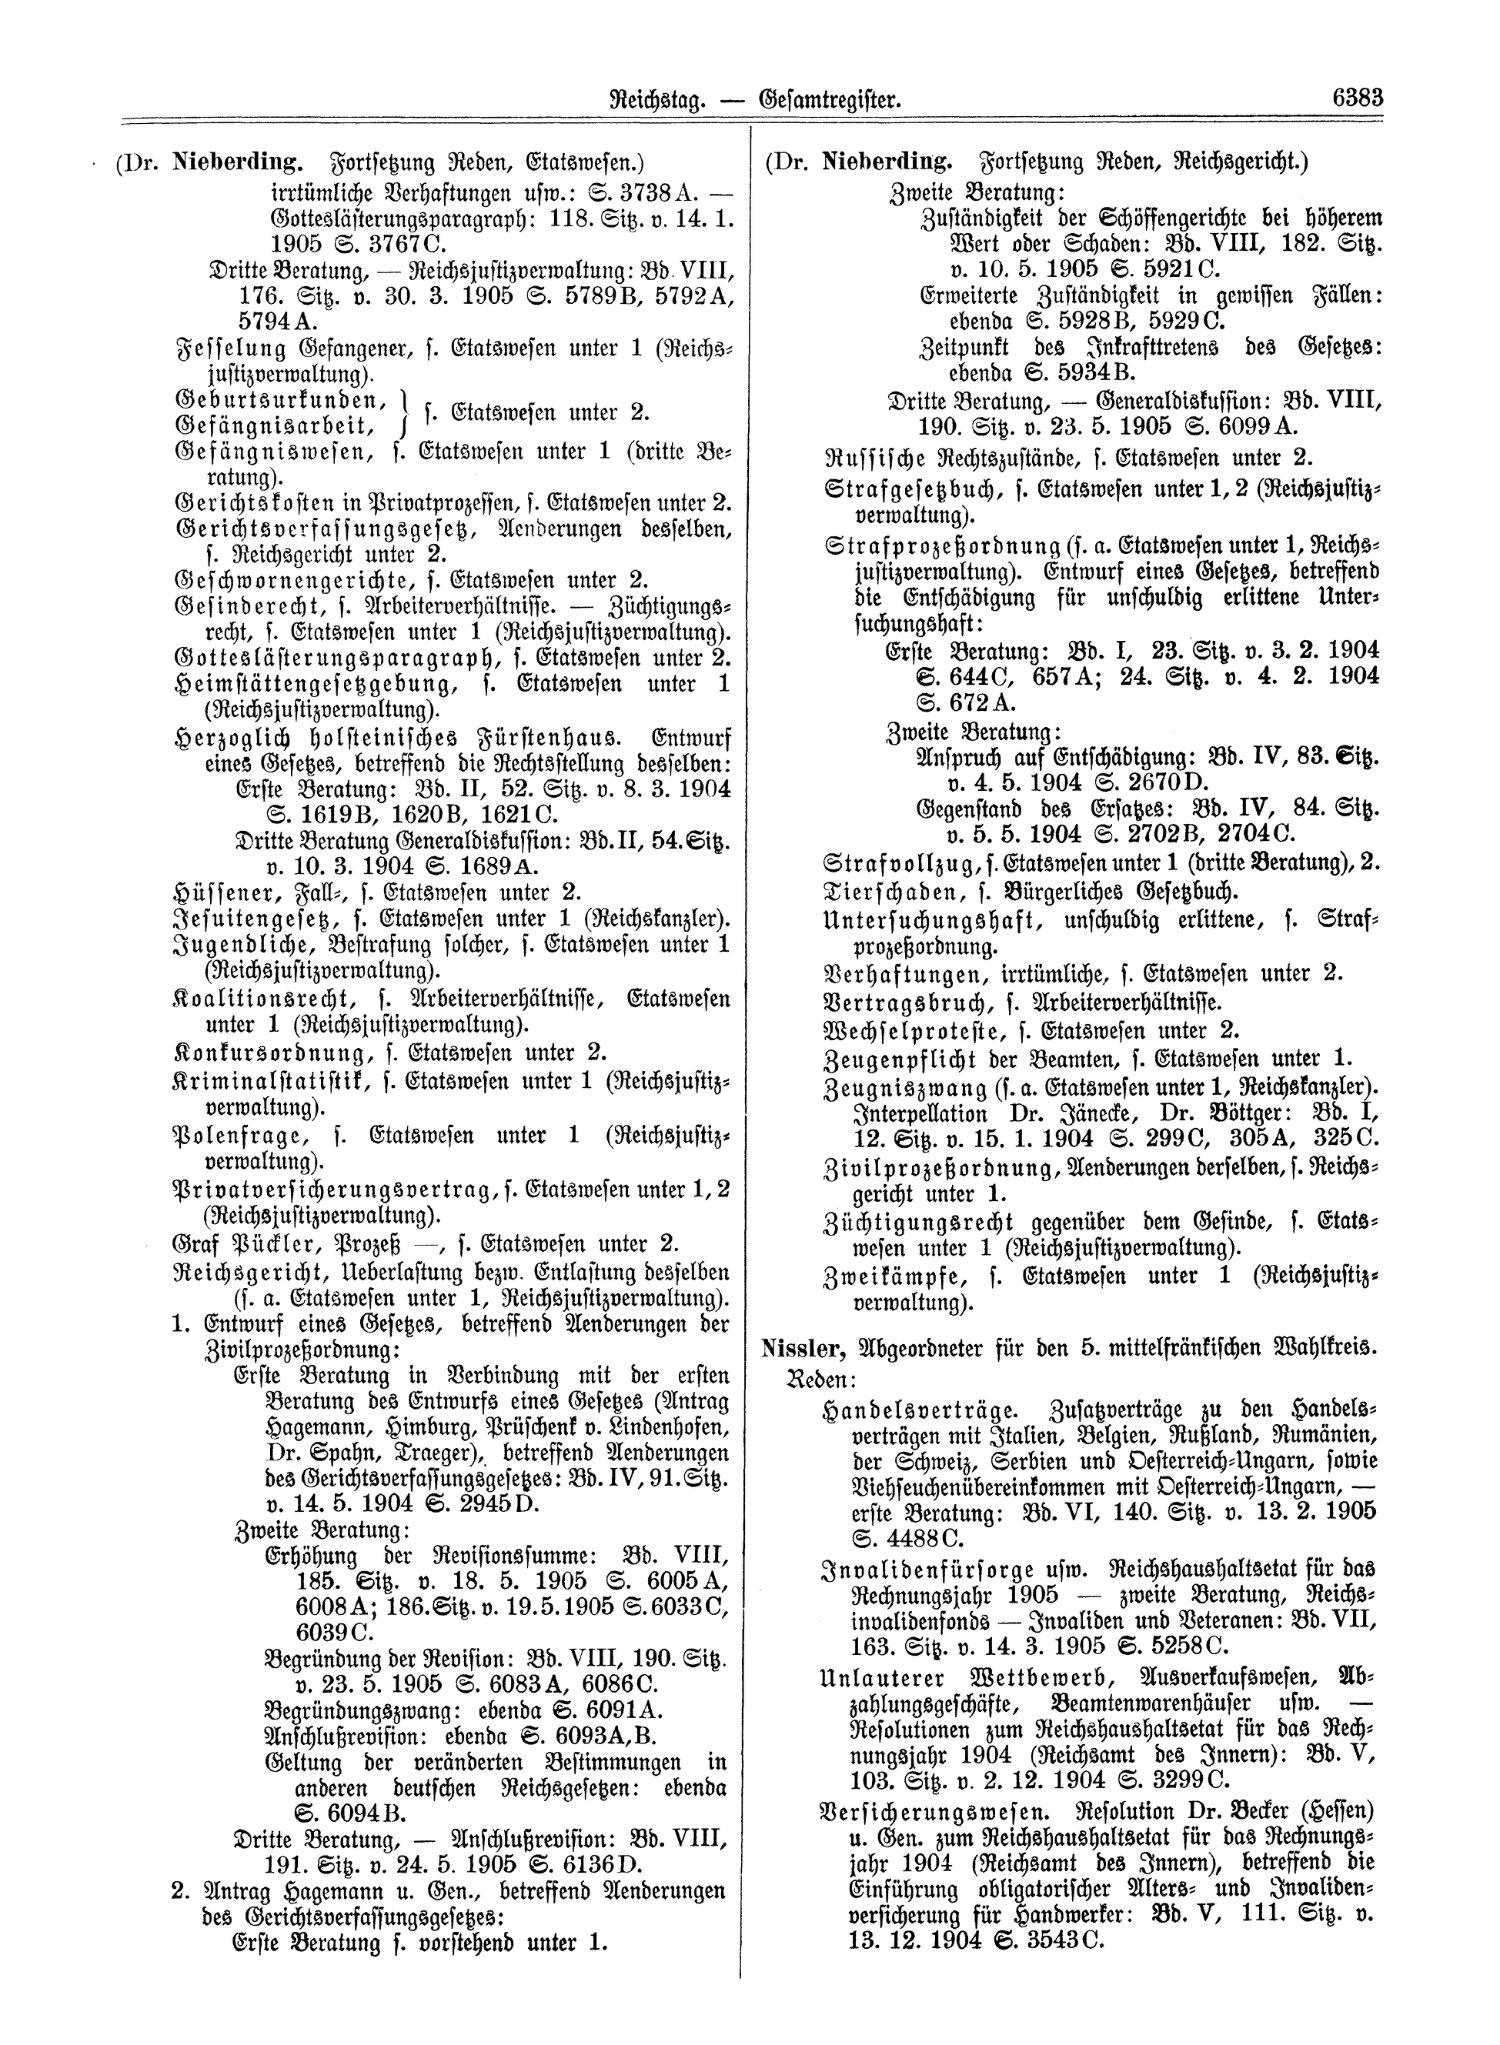 Scan of page 6383